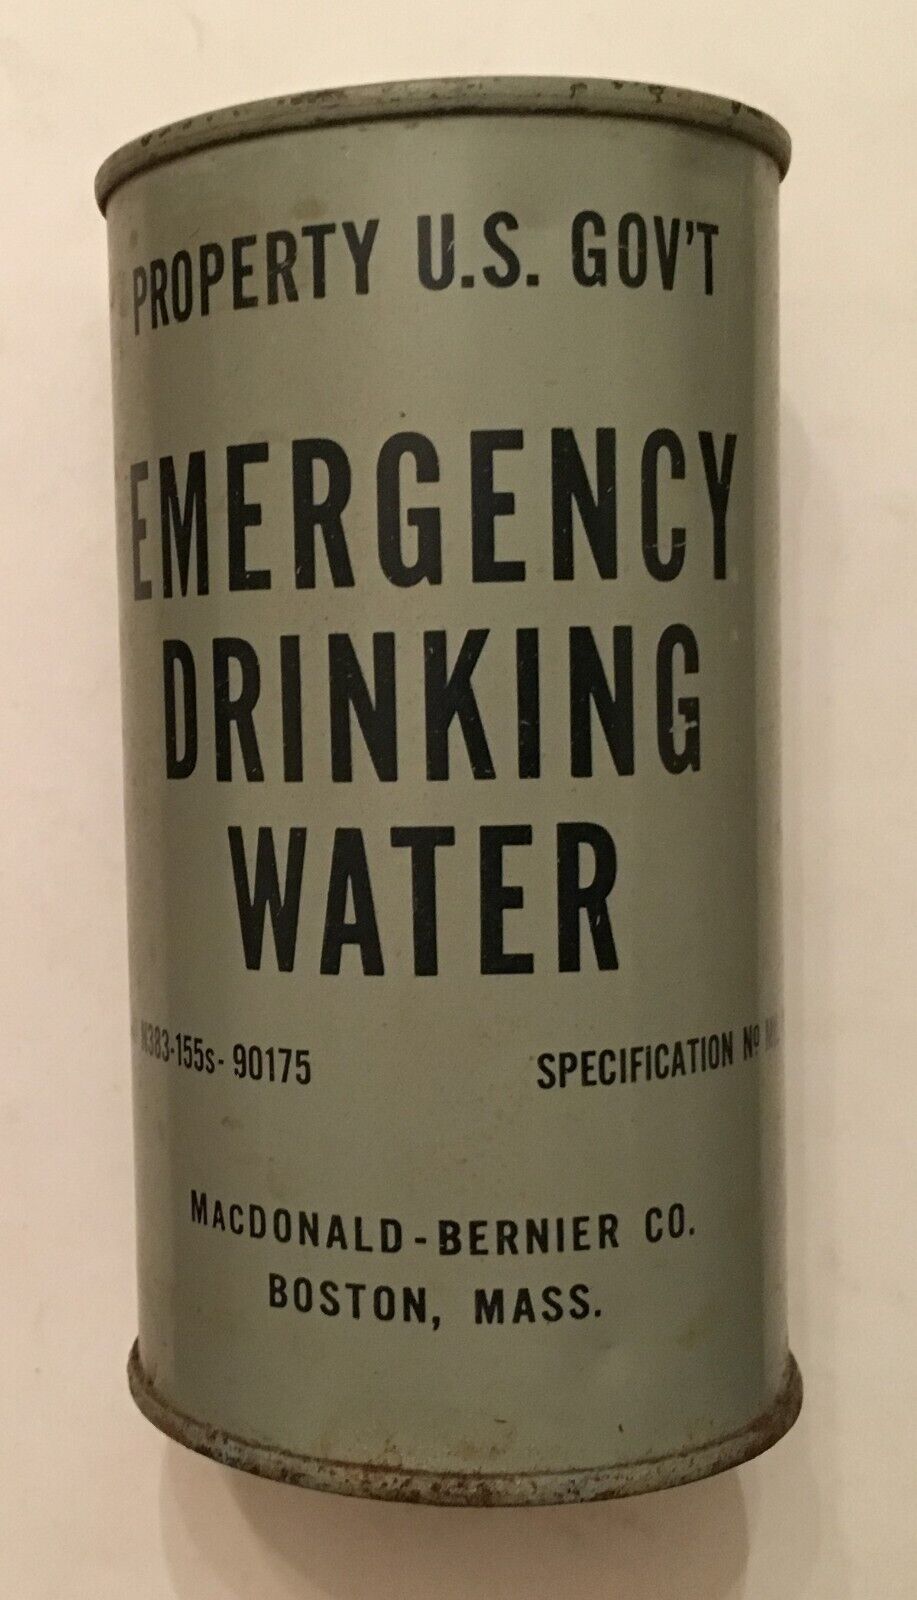 U.S. GOVERNMENT EMERGENCY DRINKING WATER CAN (LIFE BOAT RATION) - KOREAN WAR ERA